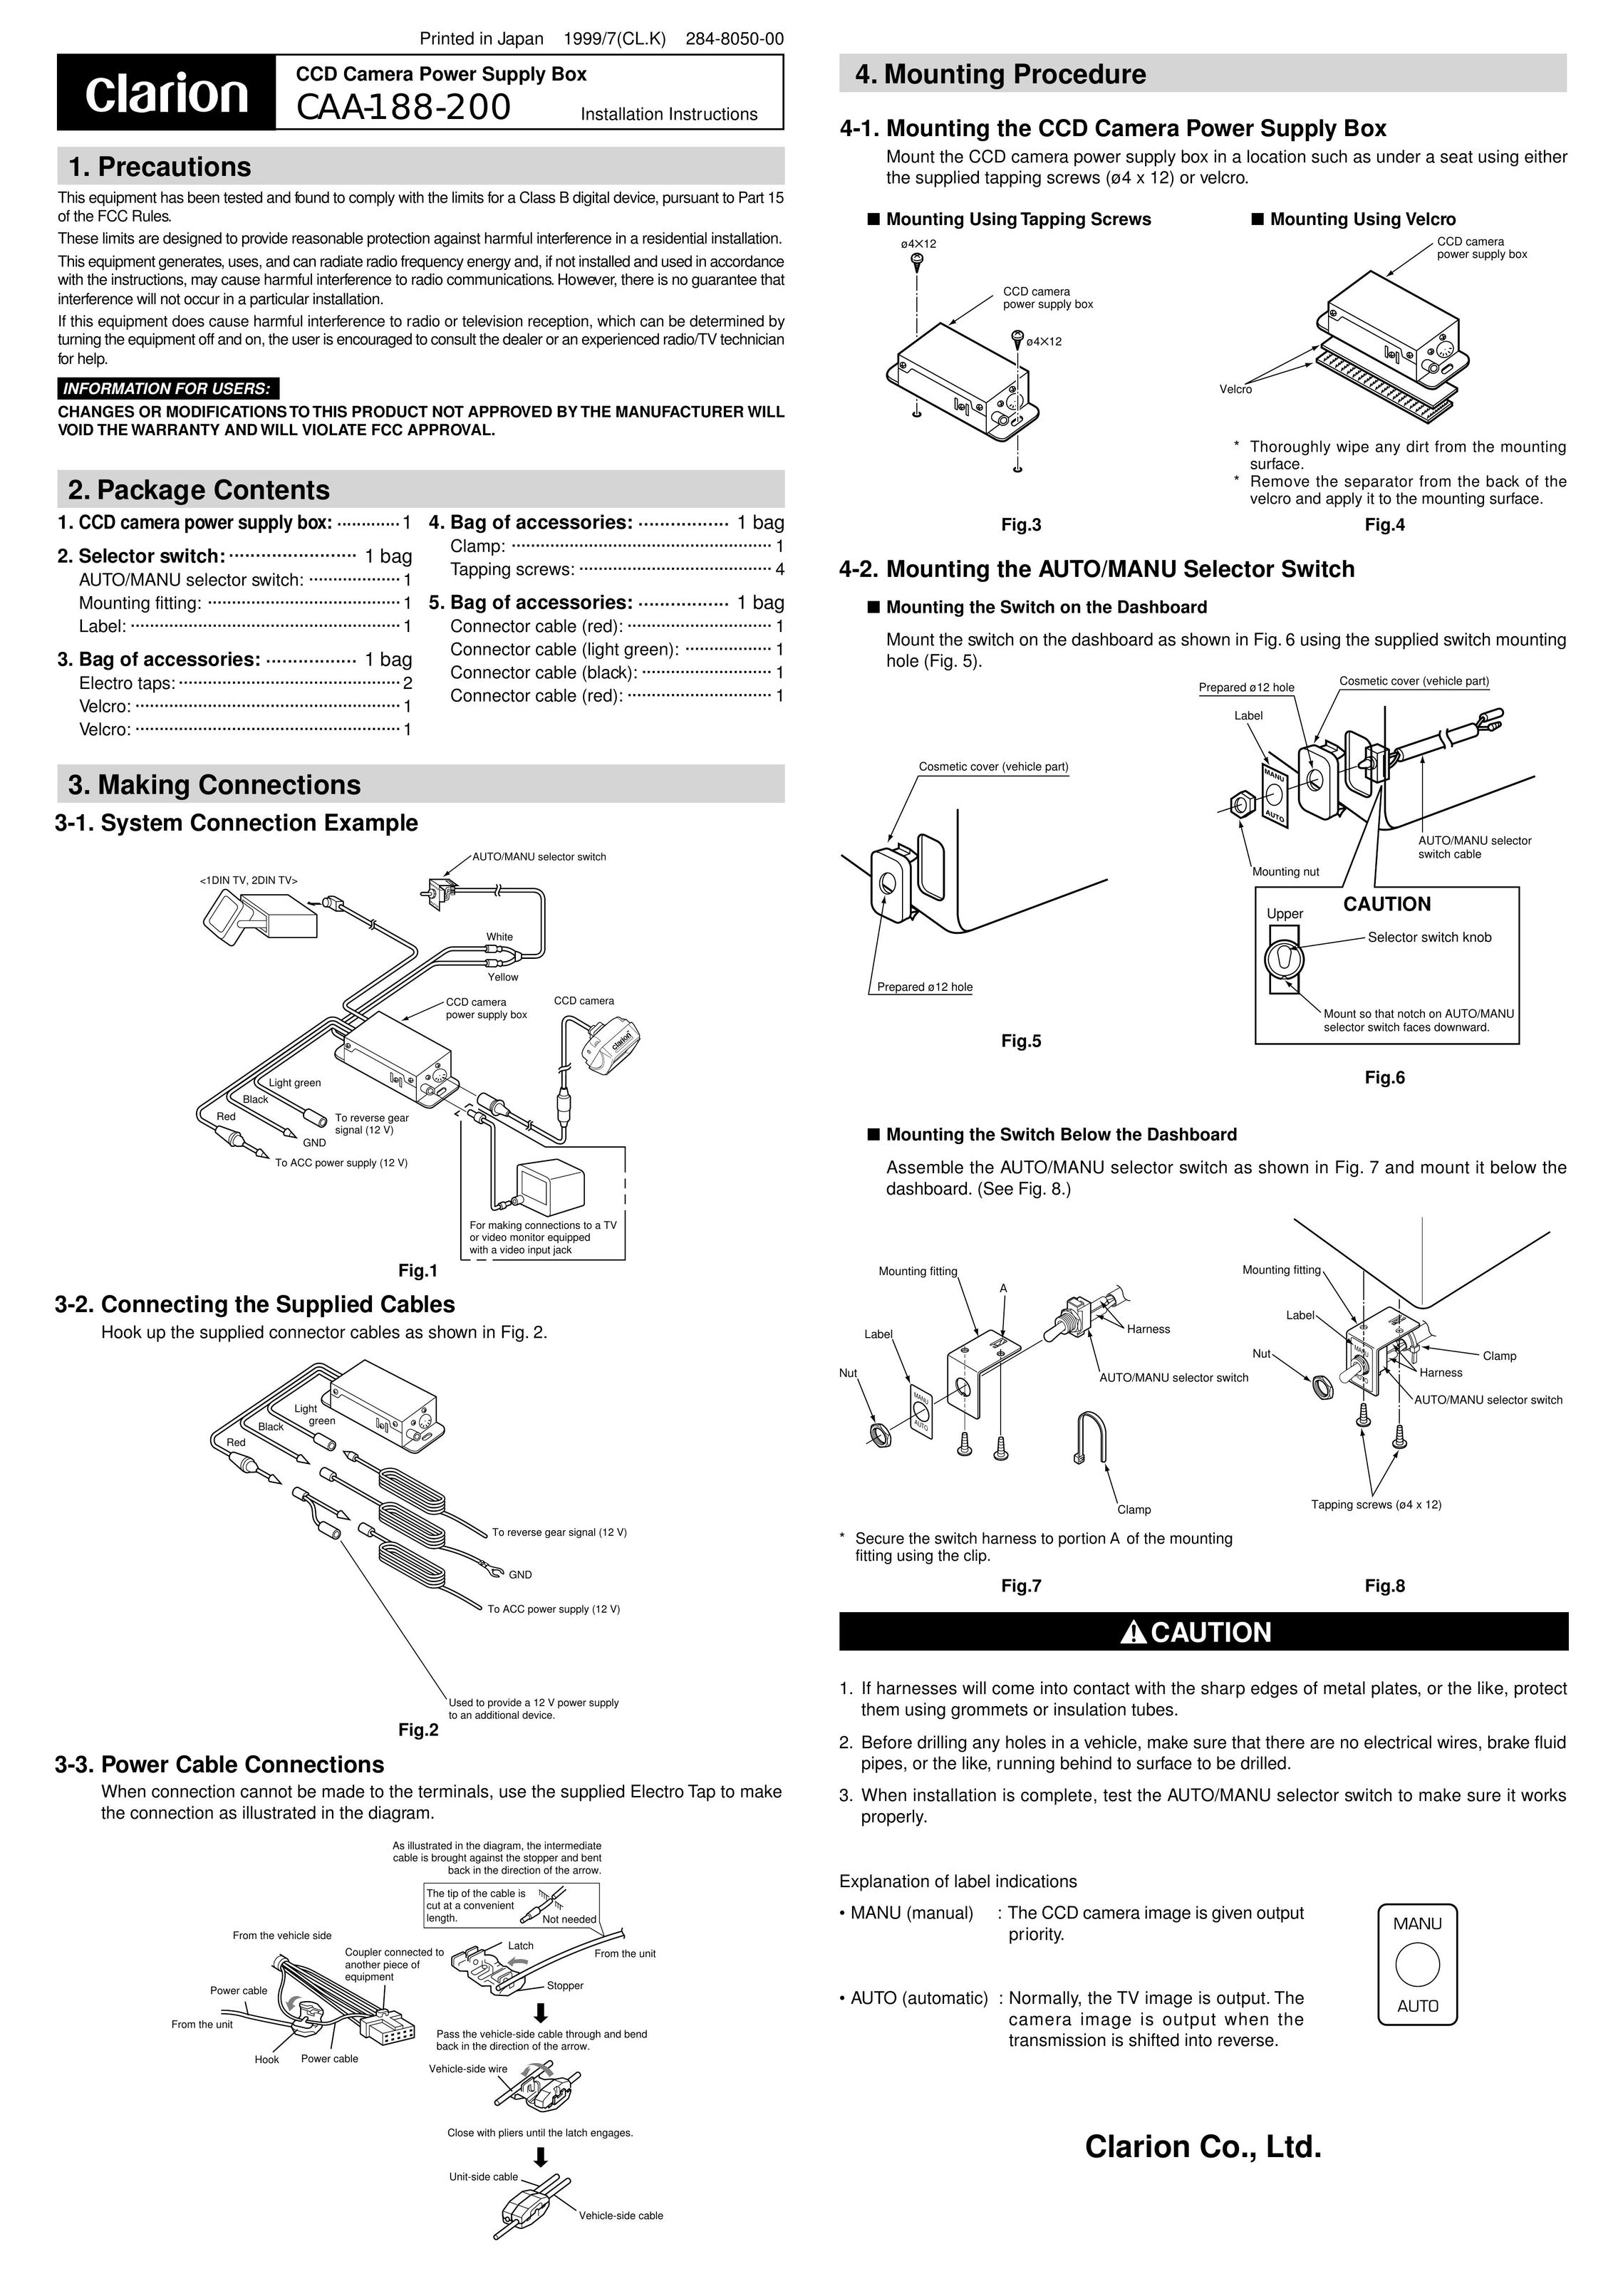 Clarion CAA-188-200 Power Supply User Manual